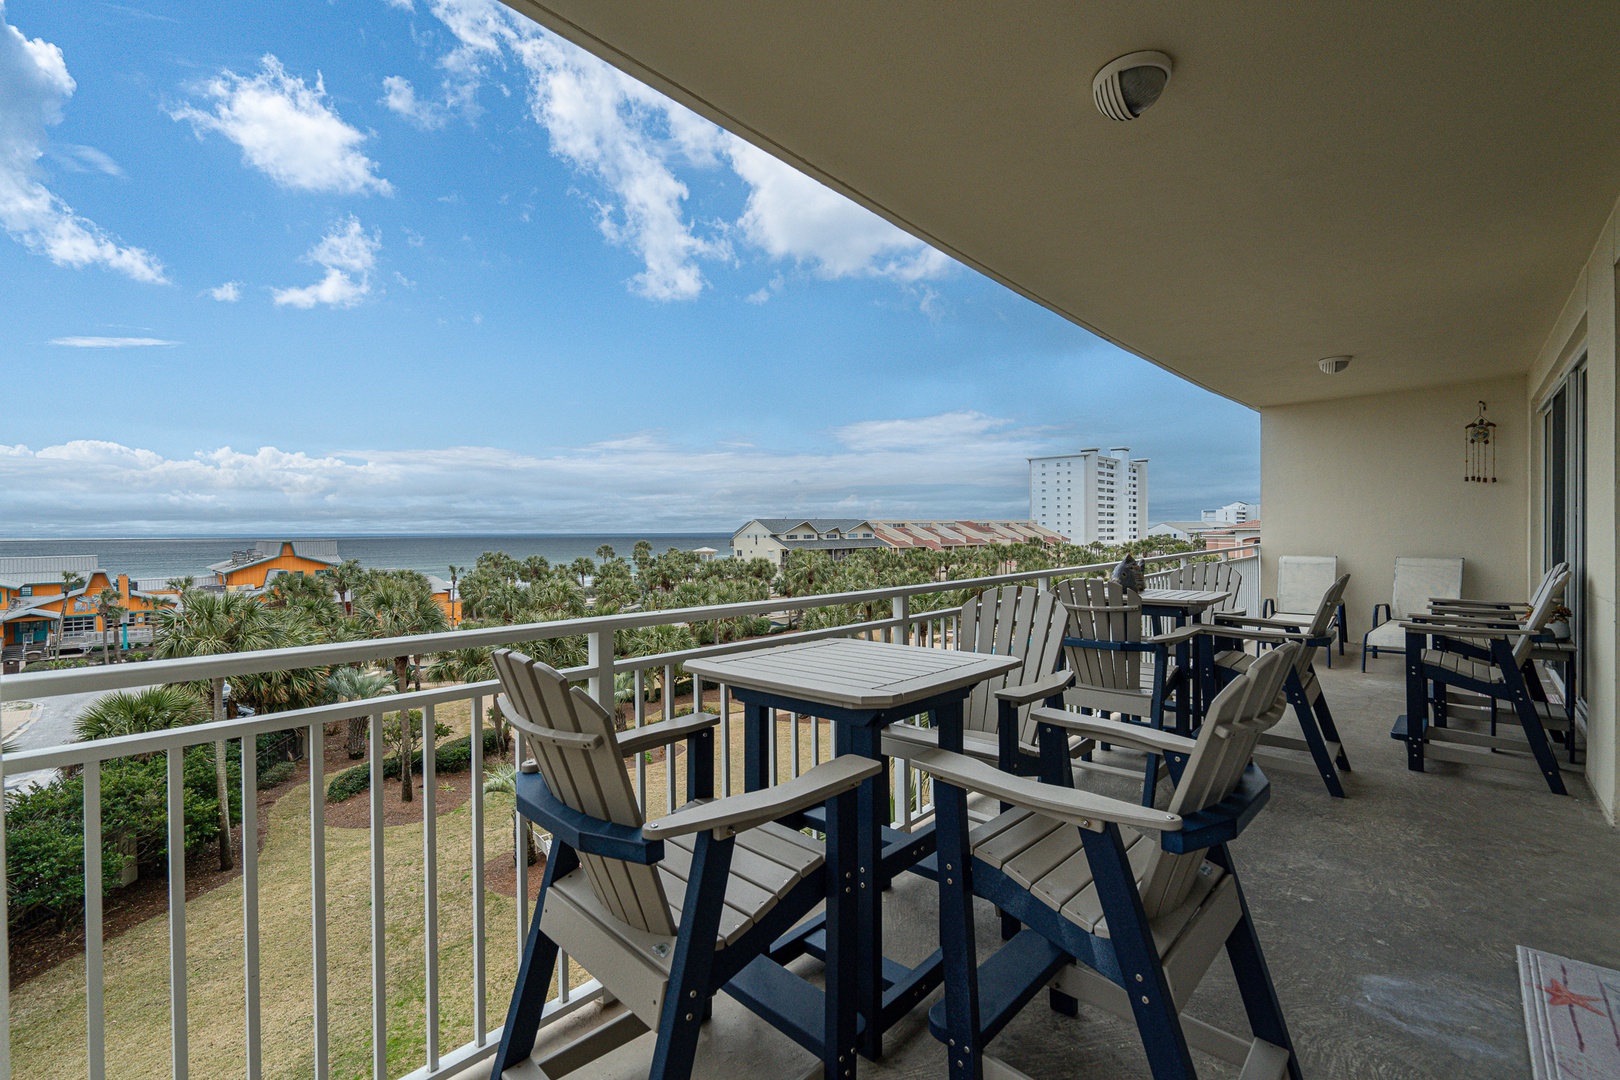 Step out onto the balcony to relax & dine with stunning water views